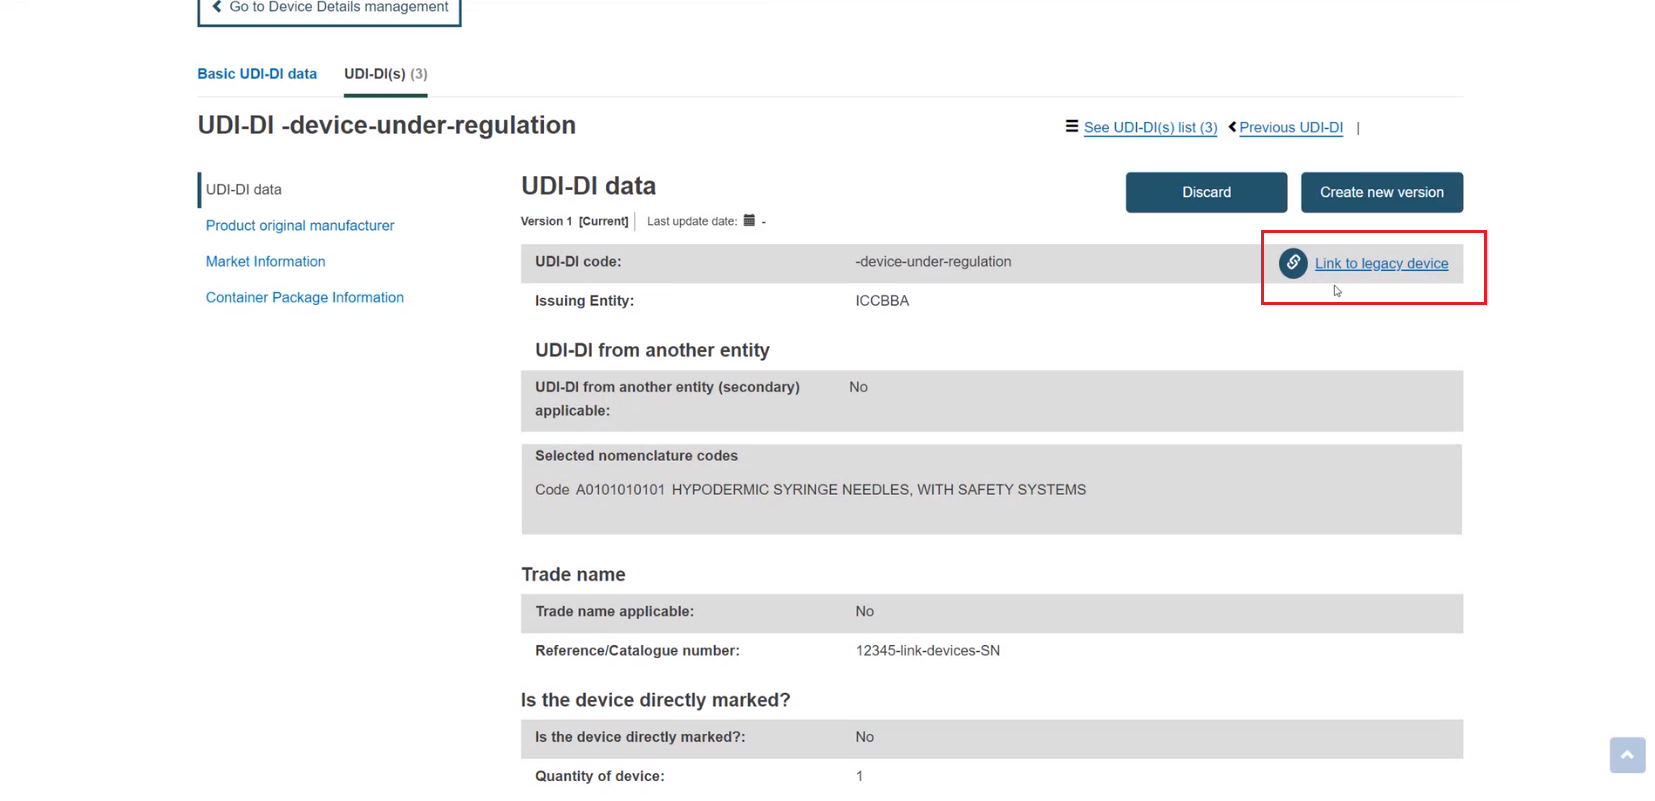 EUDAMED link to legacy device link in the udi-di data section